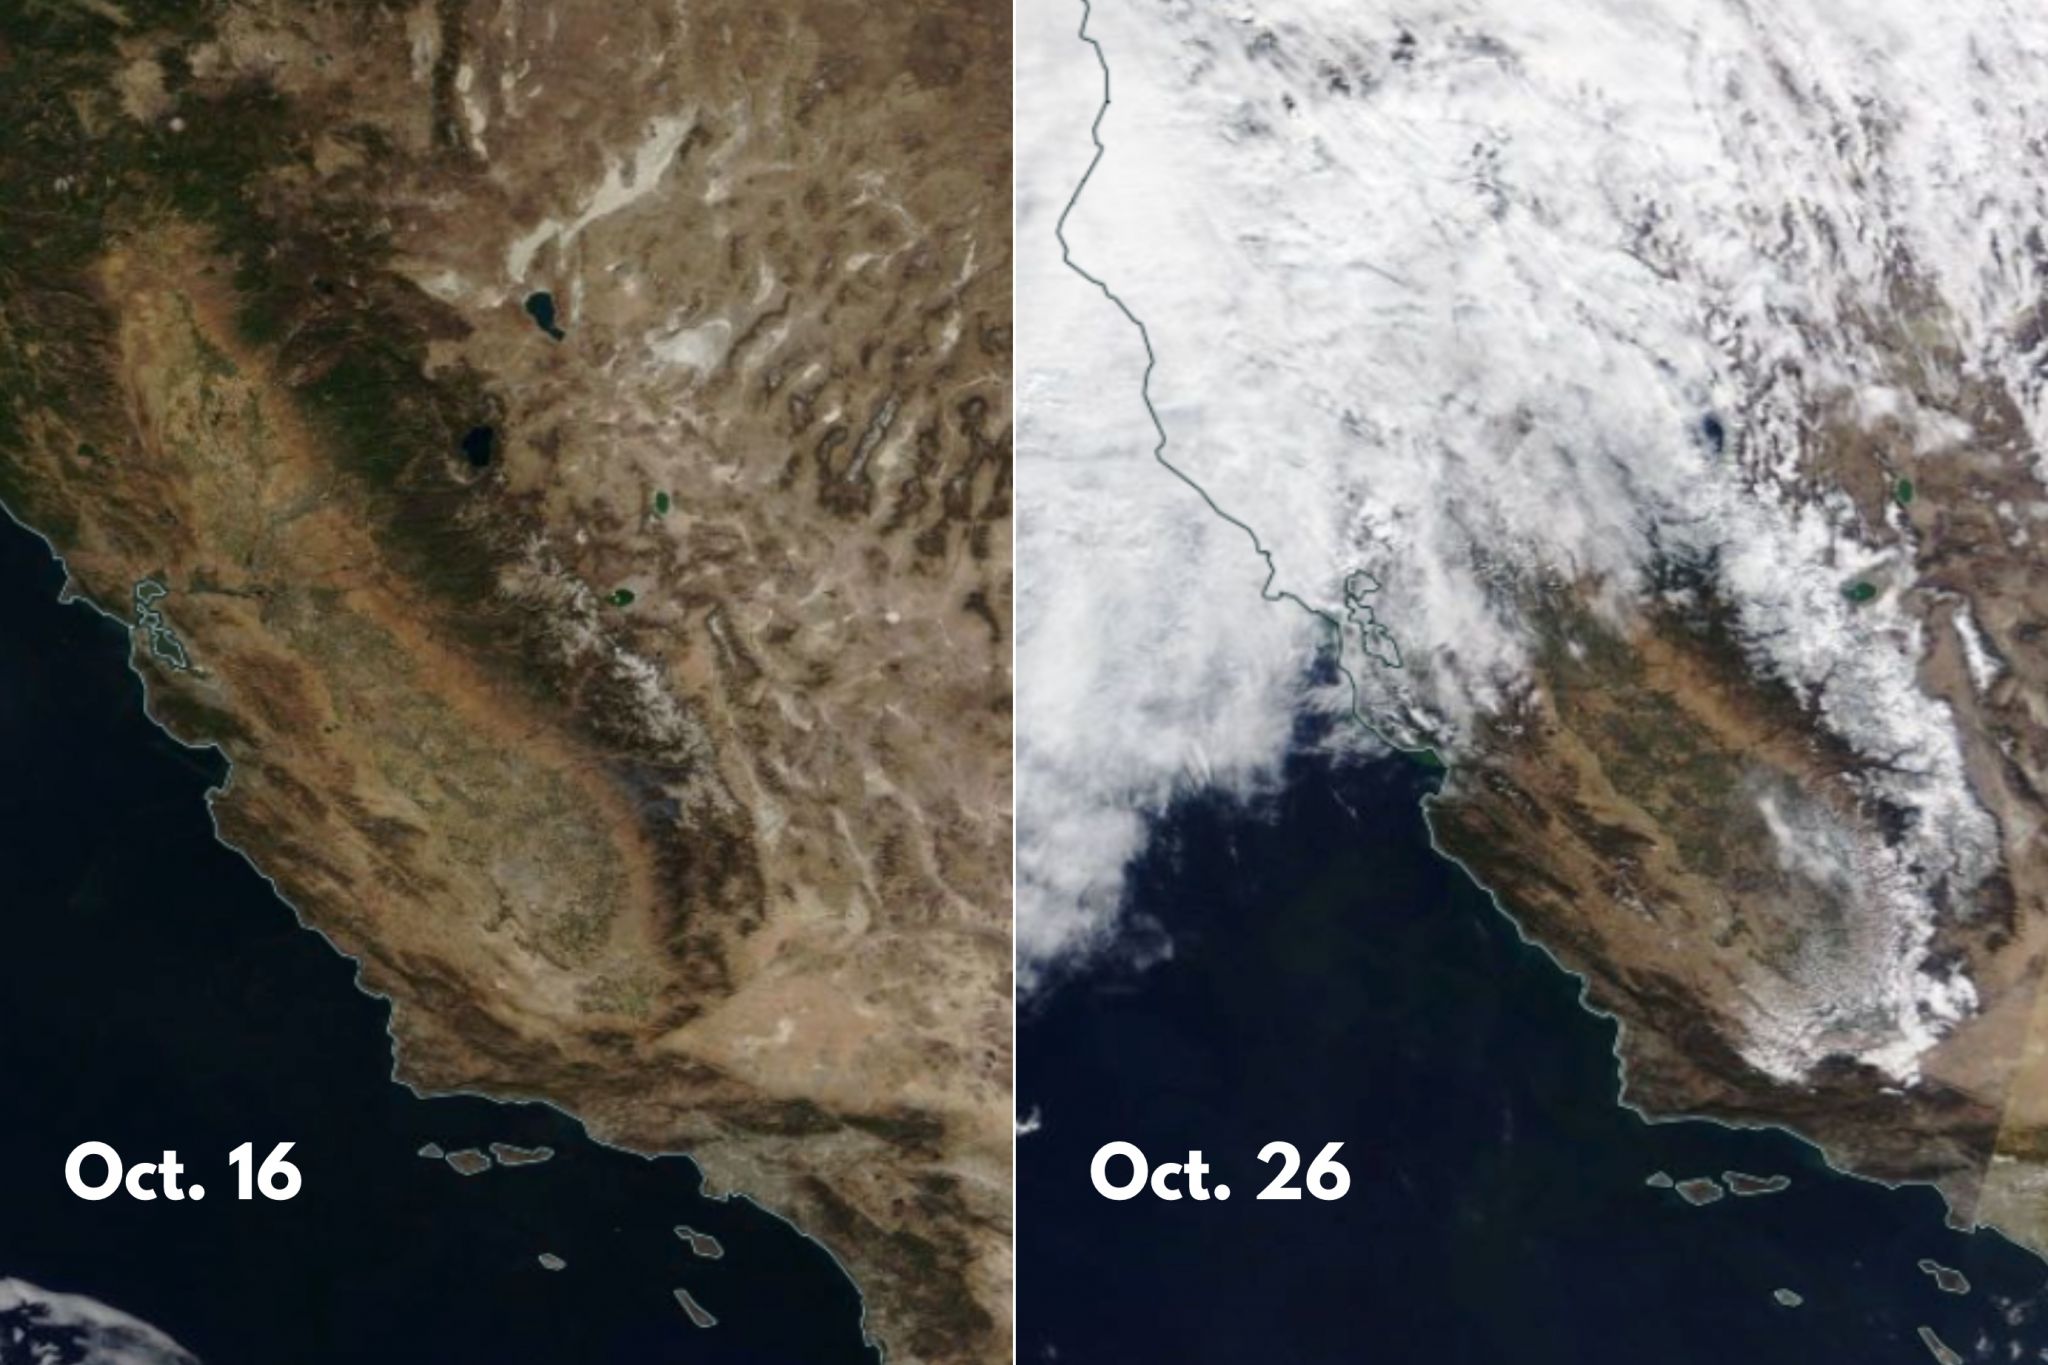 Images taken from space show dramatic change in California's Sierra